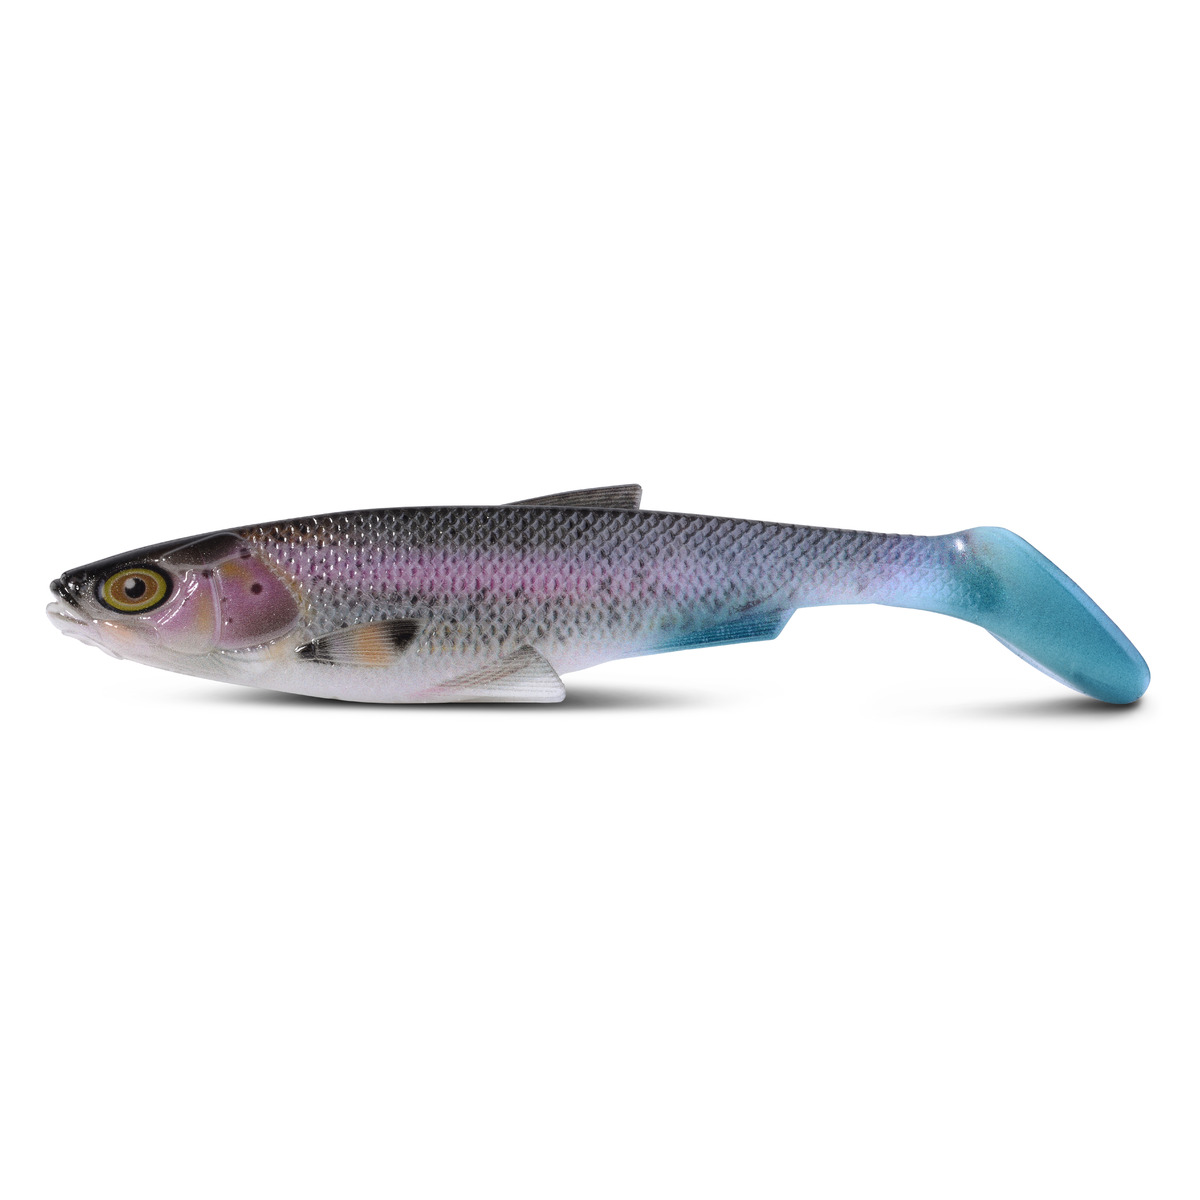 Iron Claw Belly Boy Ng Nature 7 Cm - Trucha arco iris